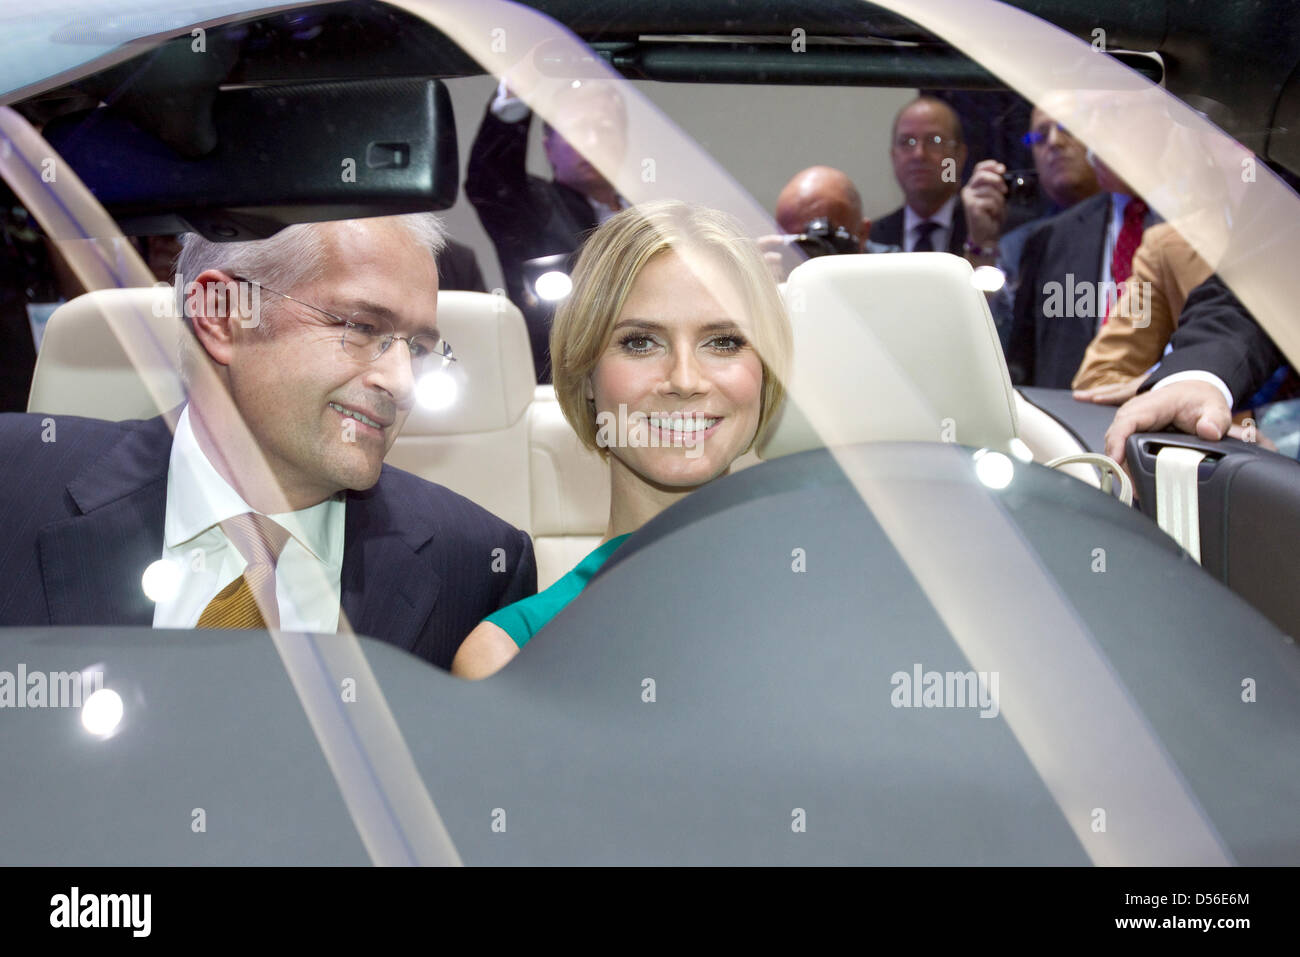 A handout picture released by Volkswagen shows German top model Heidi Klum (R) and Jonathan Browning (L),pPresident and CEO of Volkswagen Group of America sitting in front seats of the new VW Eos Cabrio-Coupé during the L.A. Auto Show at the Convention Center in Los Angeles, United States, 17 November 2010. VW celebrates the world premiere of the new Eos Cabrio-Coupé at the automob Stock Photo